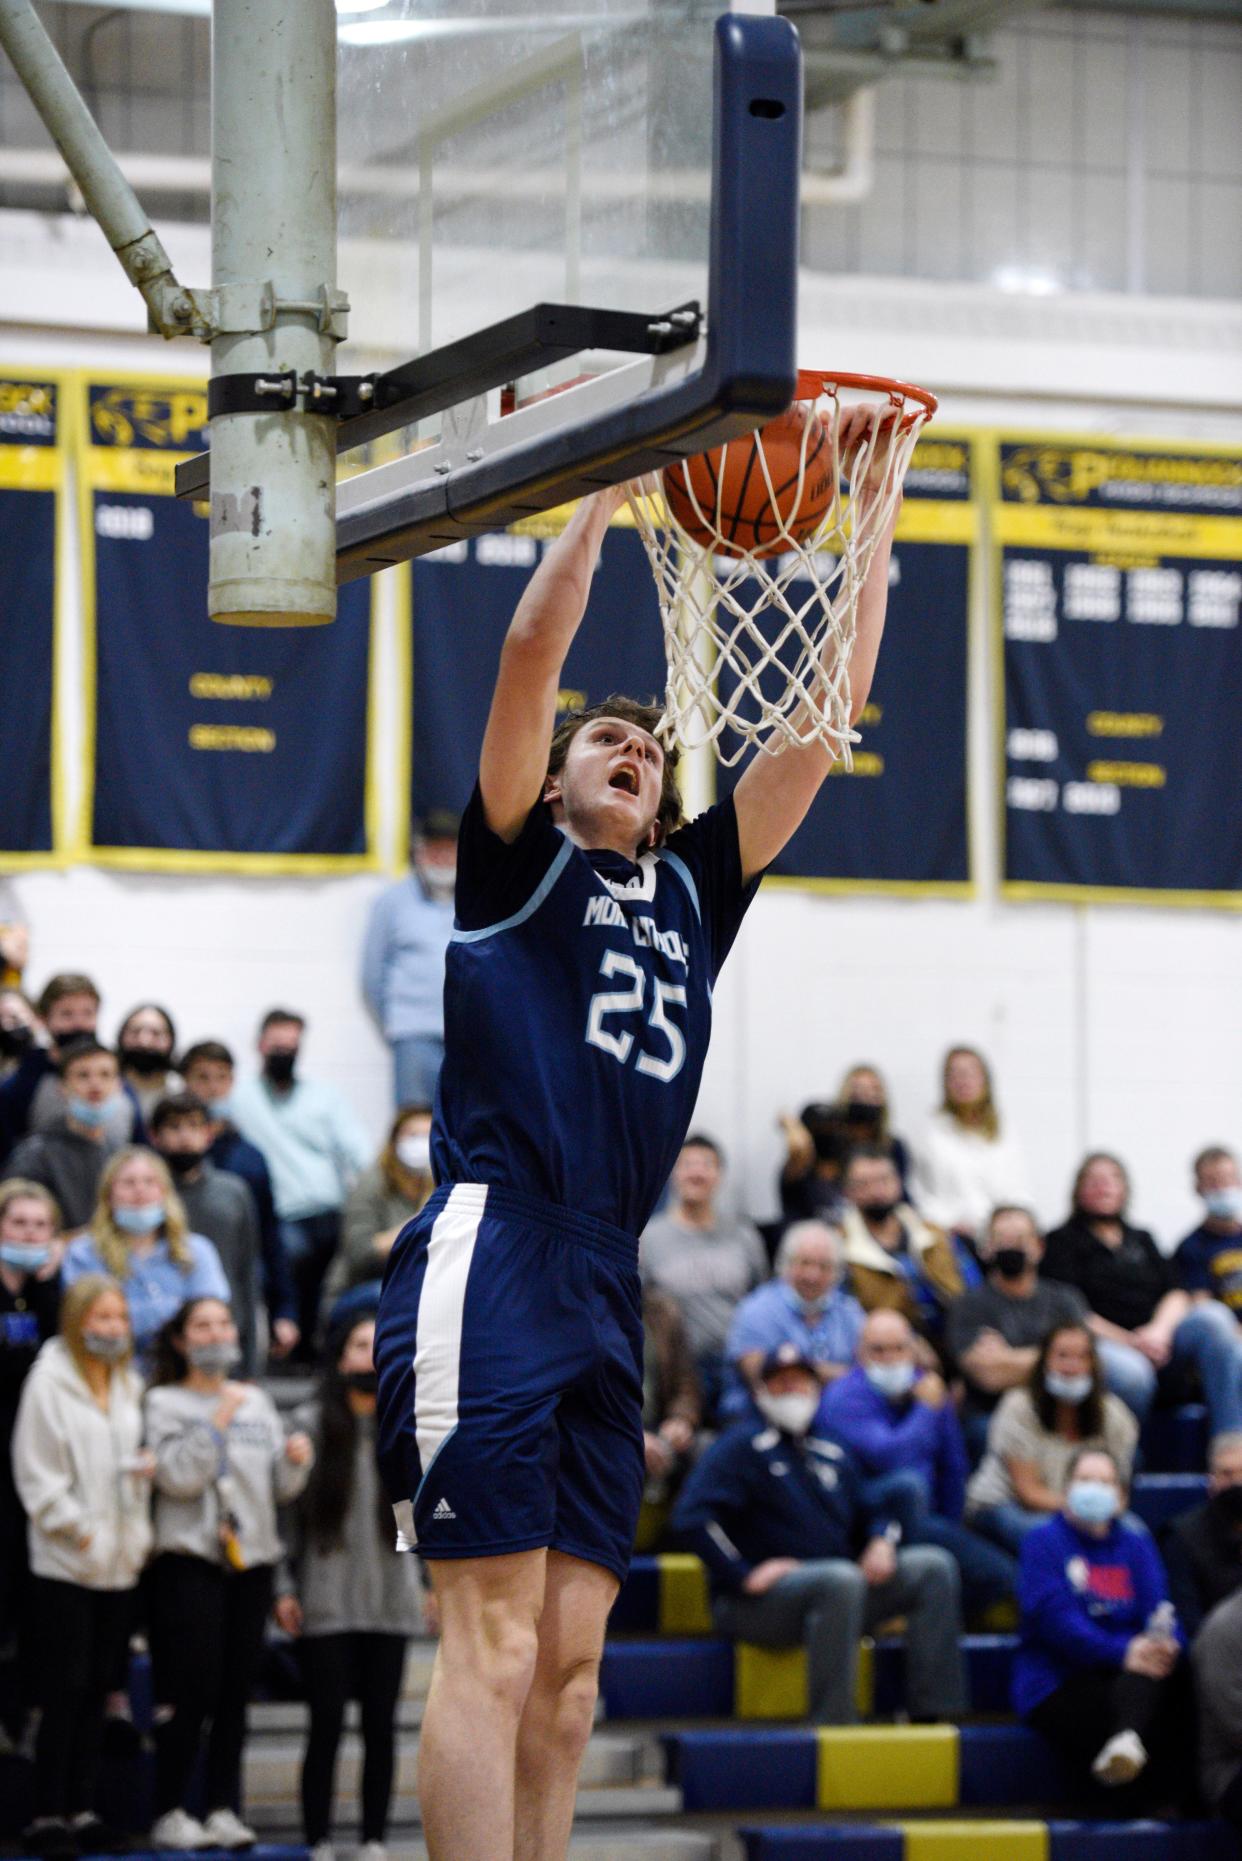 Morris Catholic boys basketball at Pequannock on Thursday, February 10, 2022. MC #25 Michelangelo Oberti drives to the basket in the second period. 